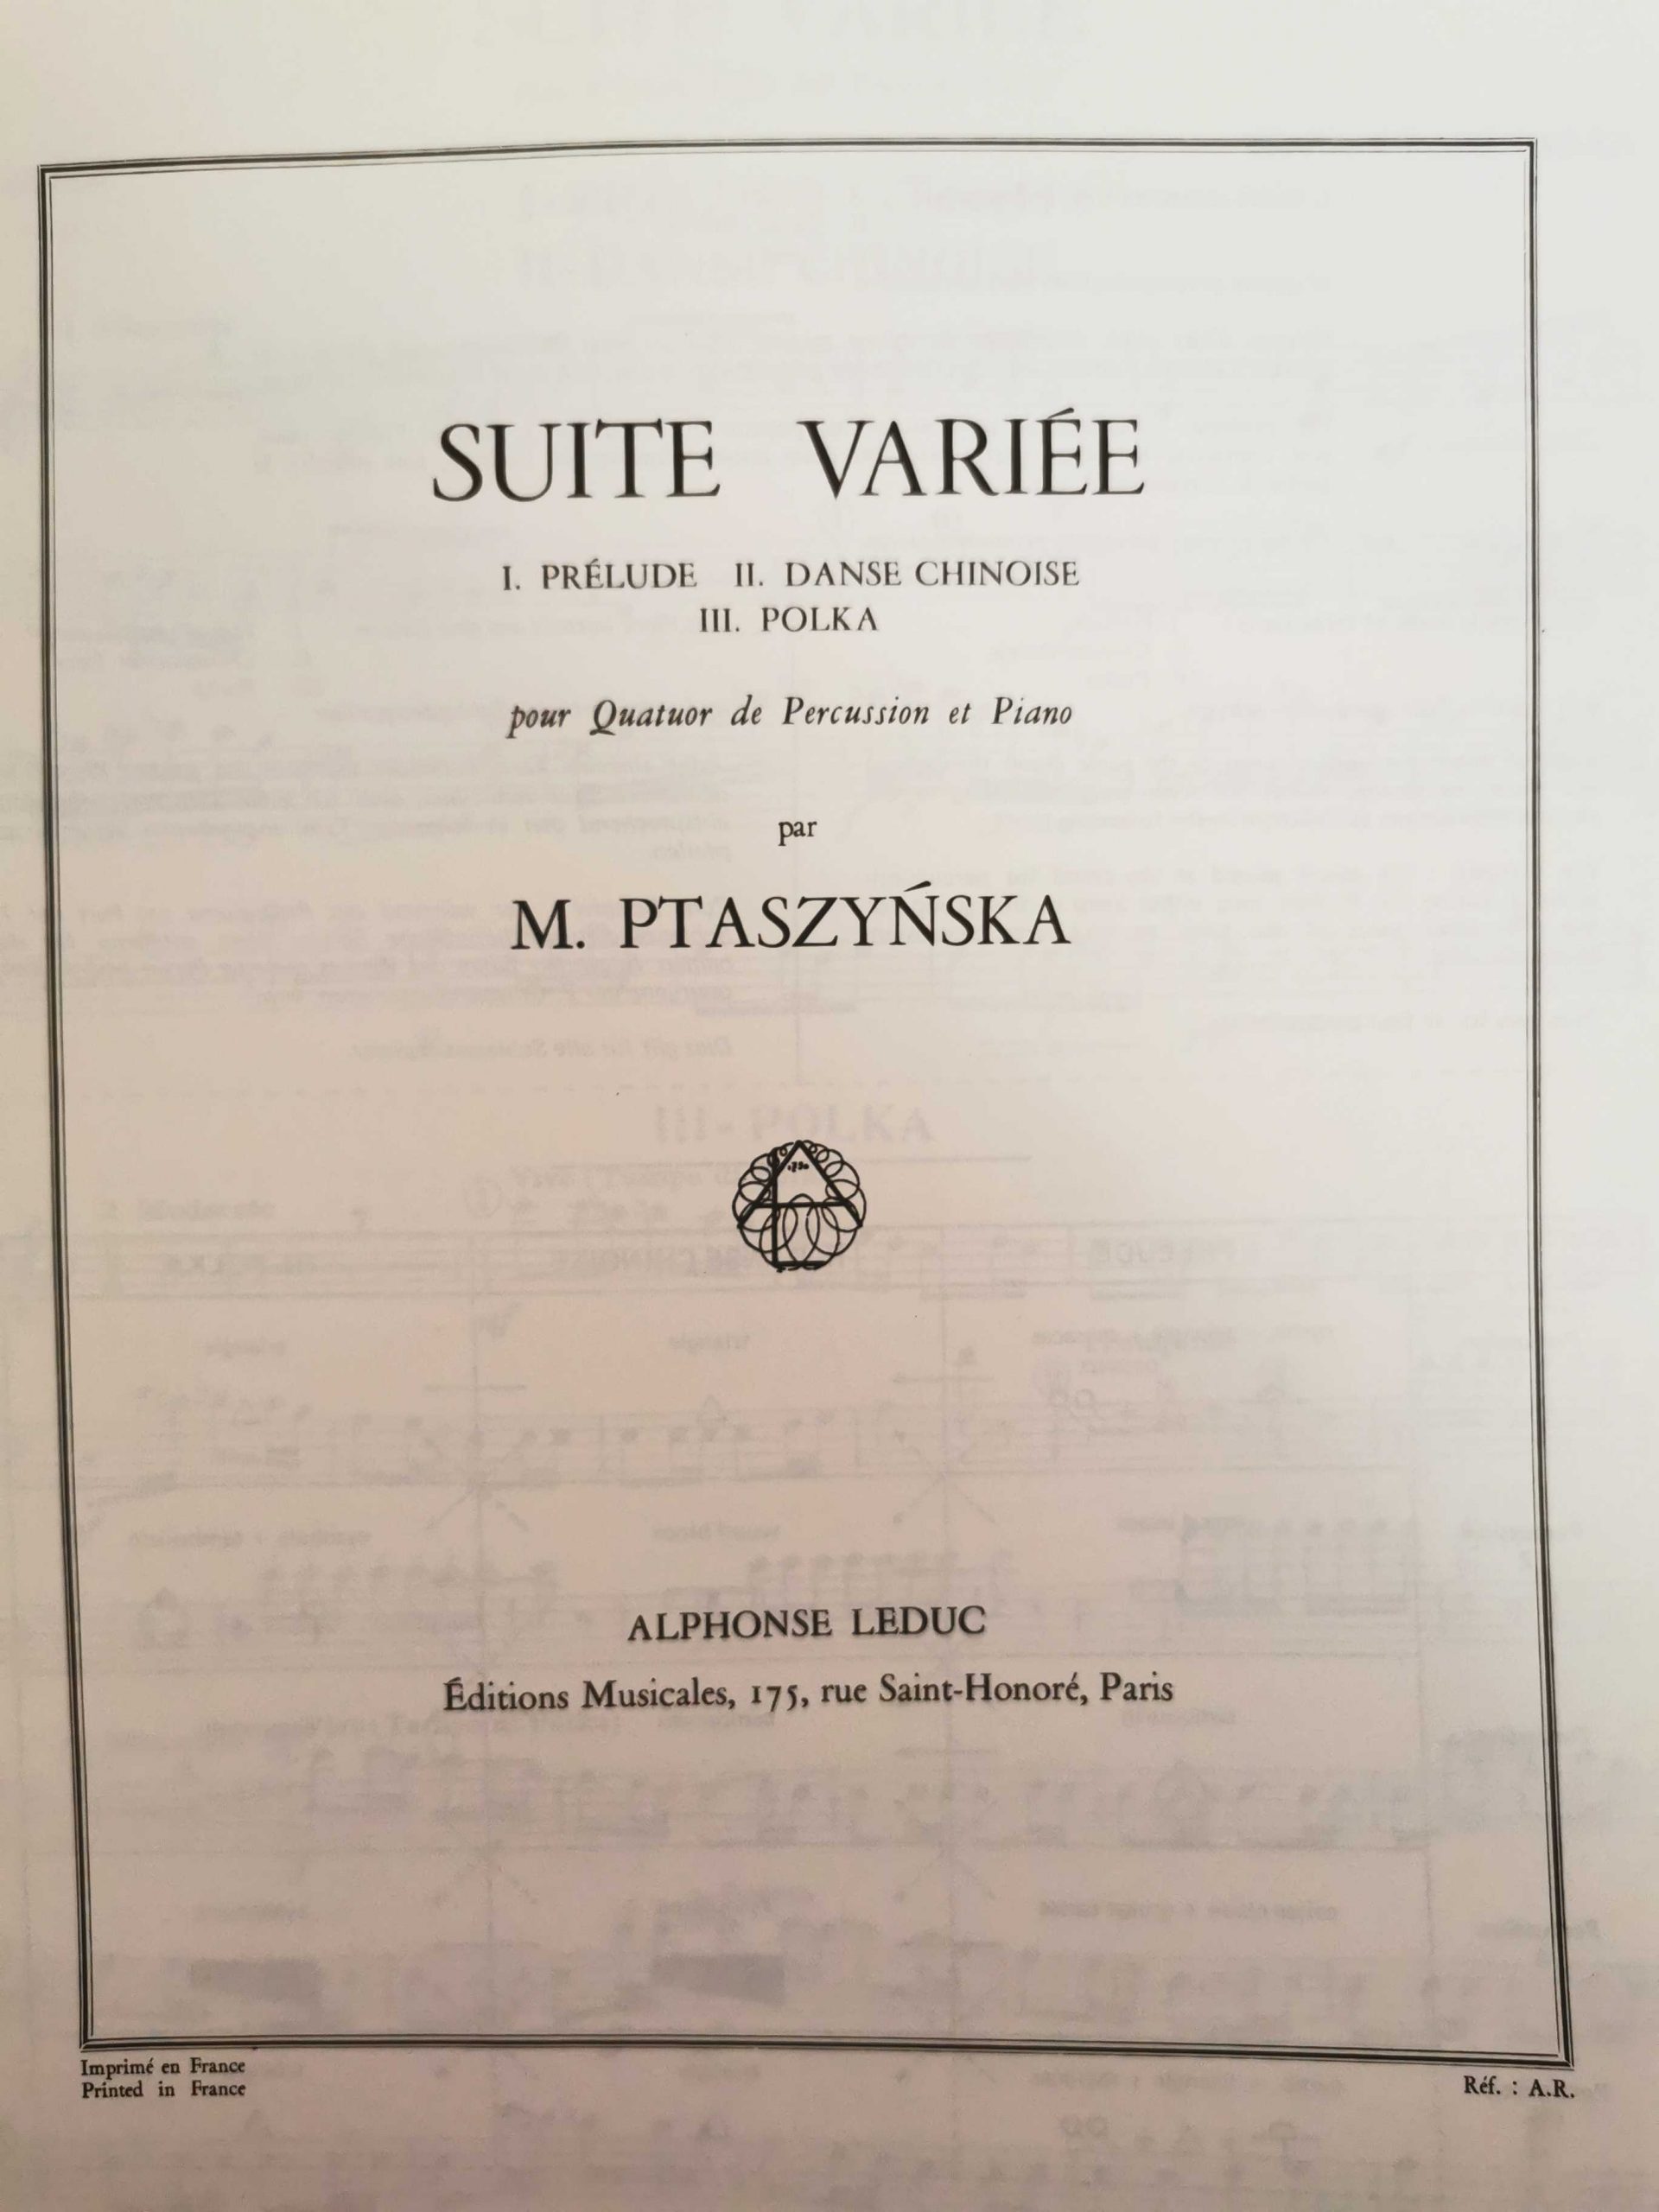 Suite Variee (Score and Parts) by Marta Ptaszynska